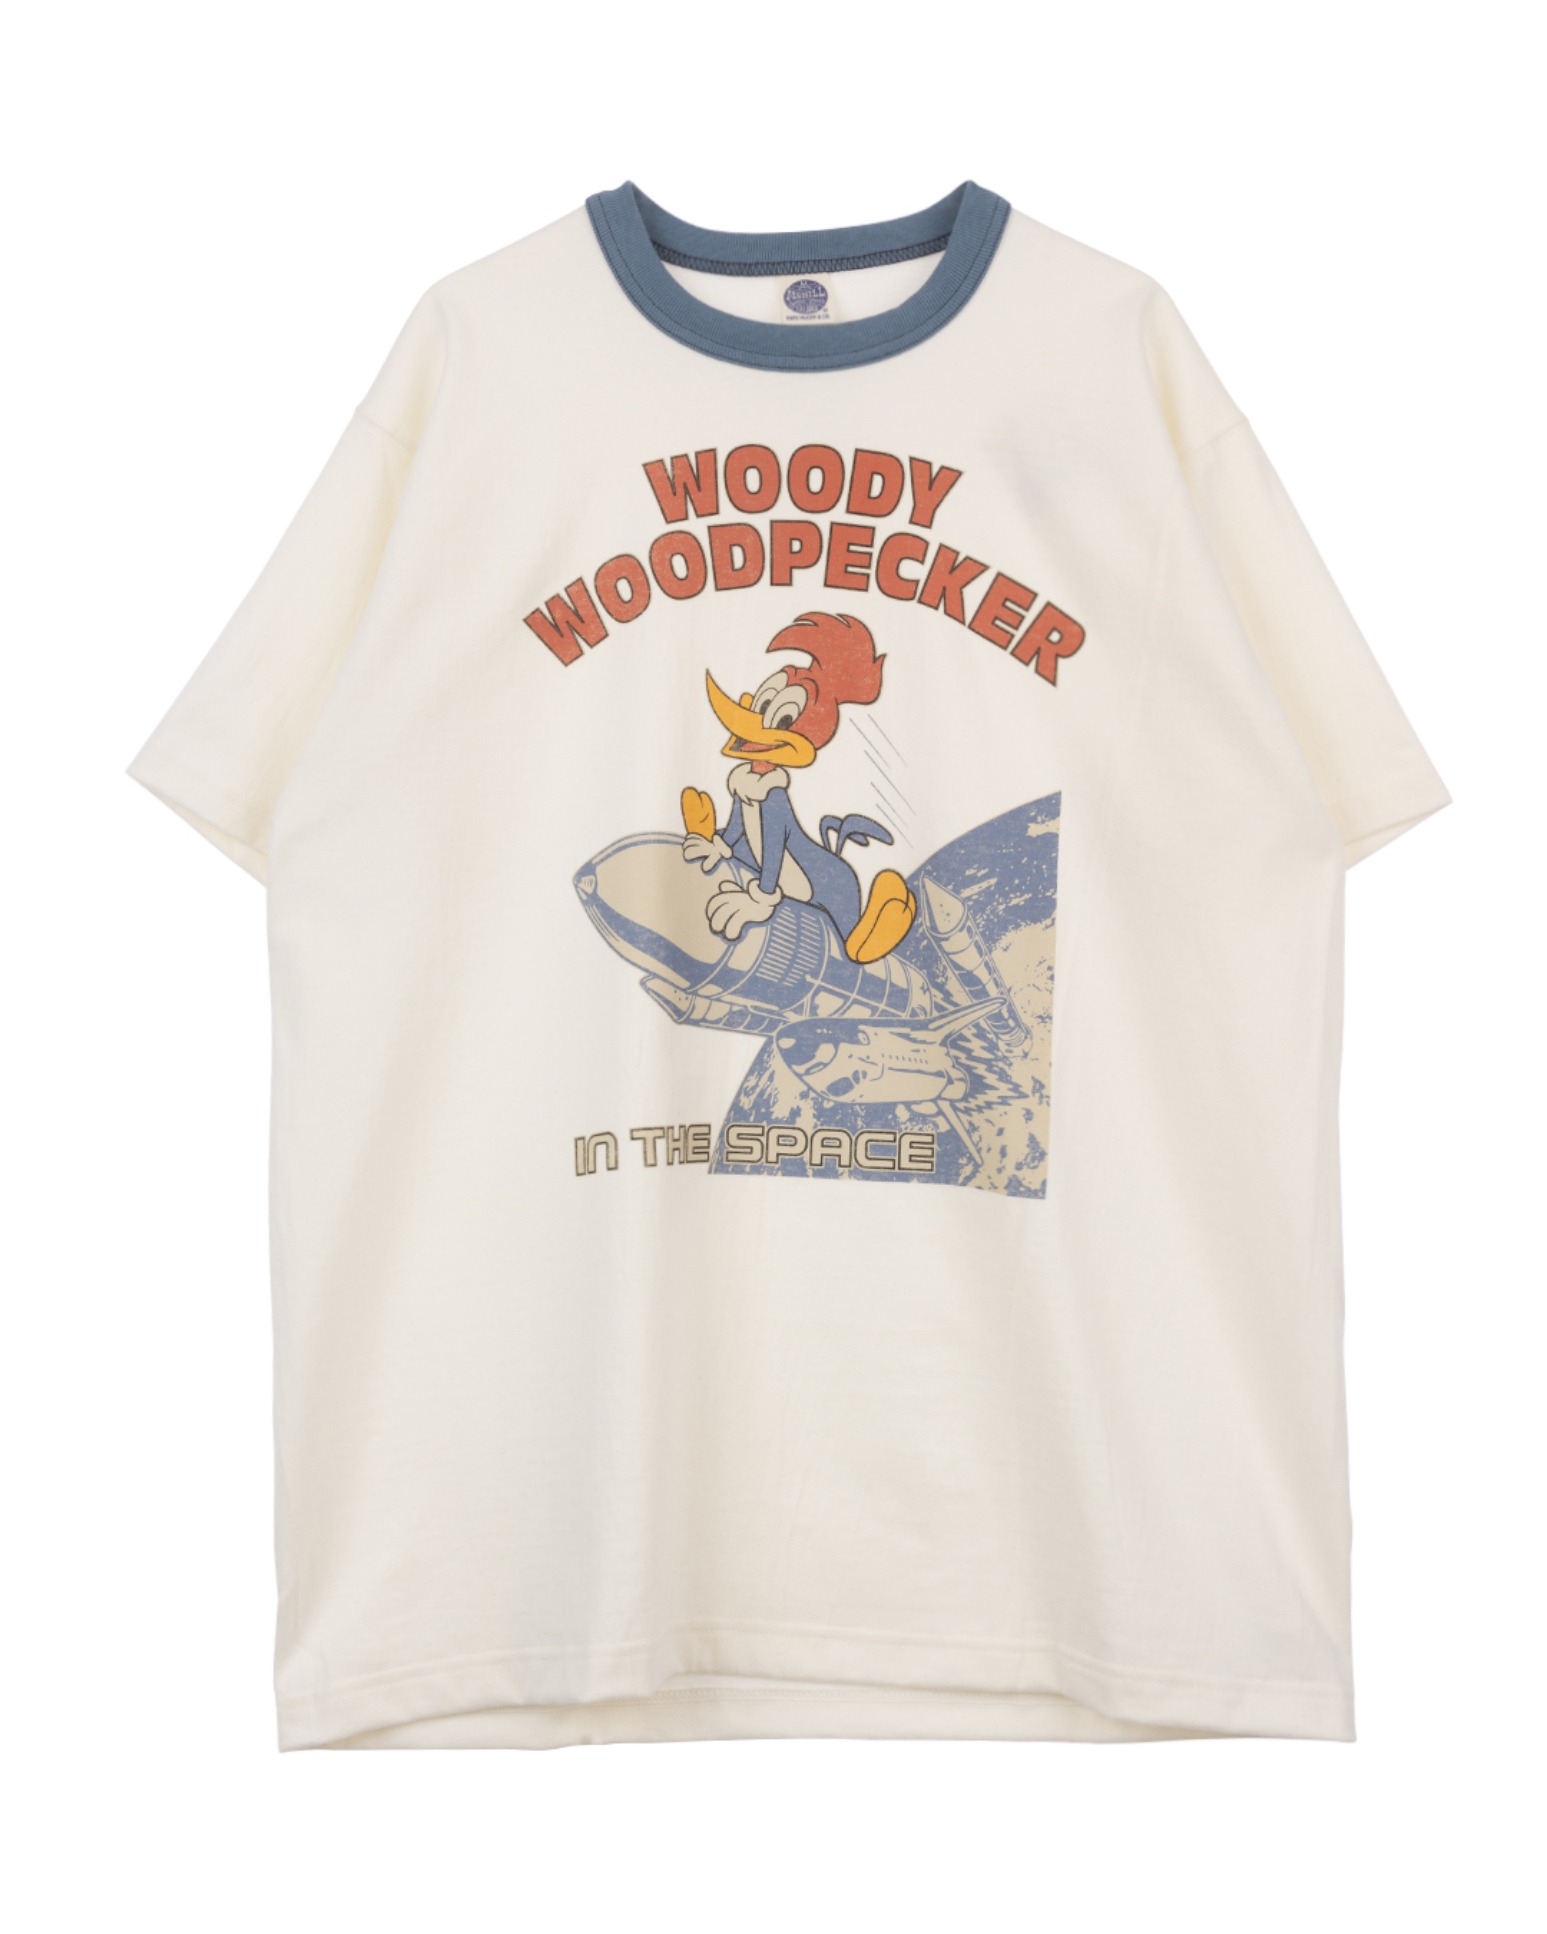 TMC2408 WOODY WOODPECKER TEE &quot;WOODY WOODPECKER IN THE SPACE&quot;(Off White)